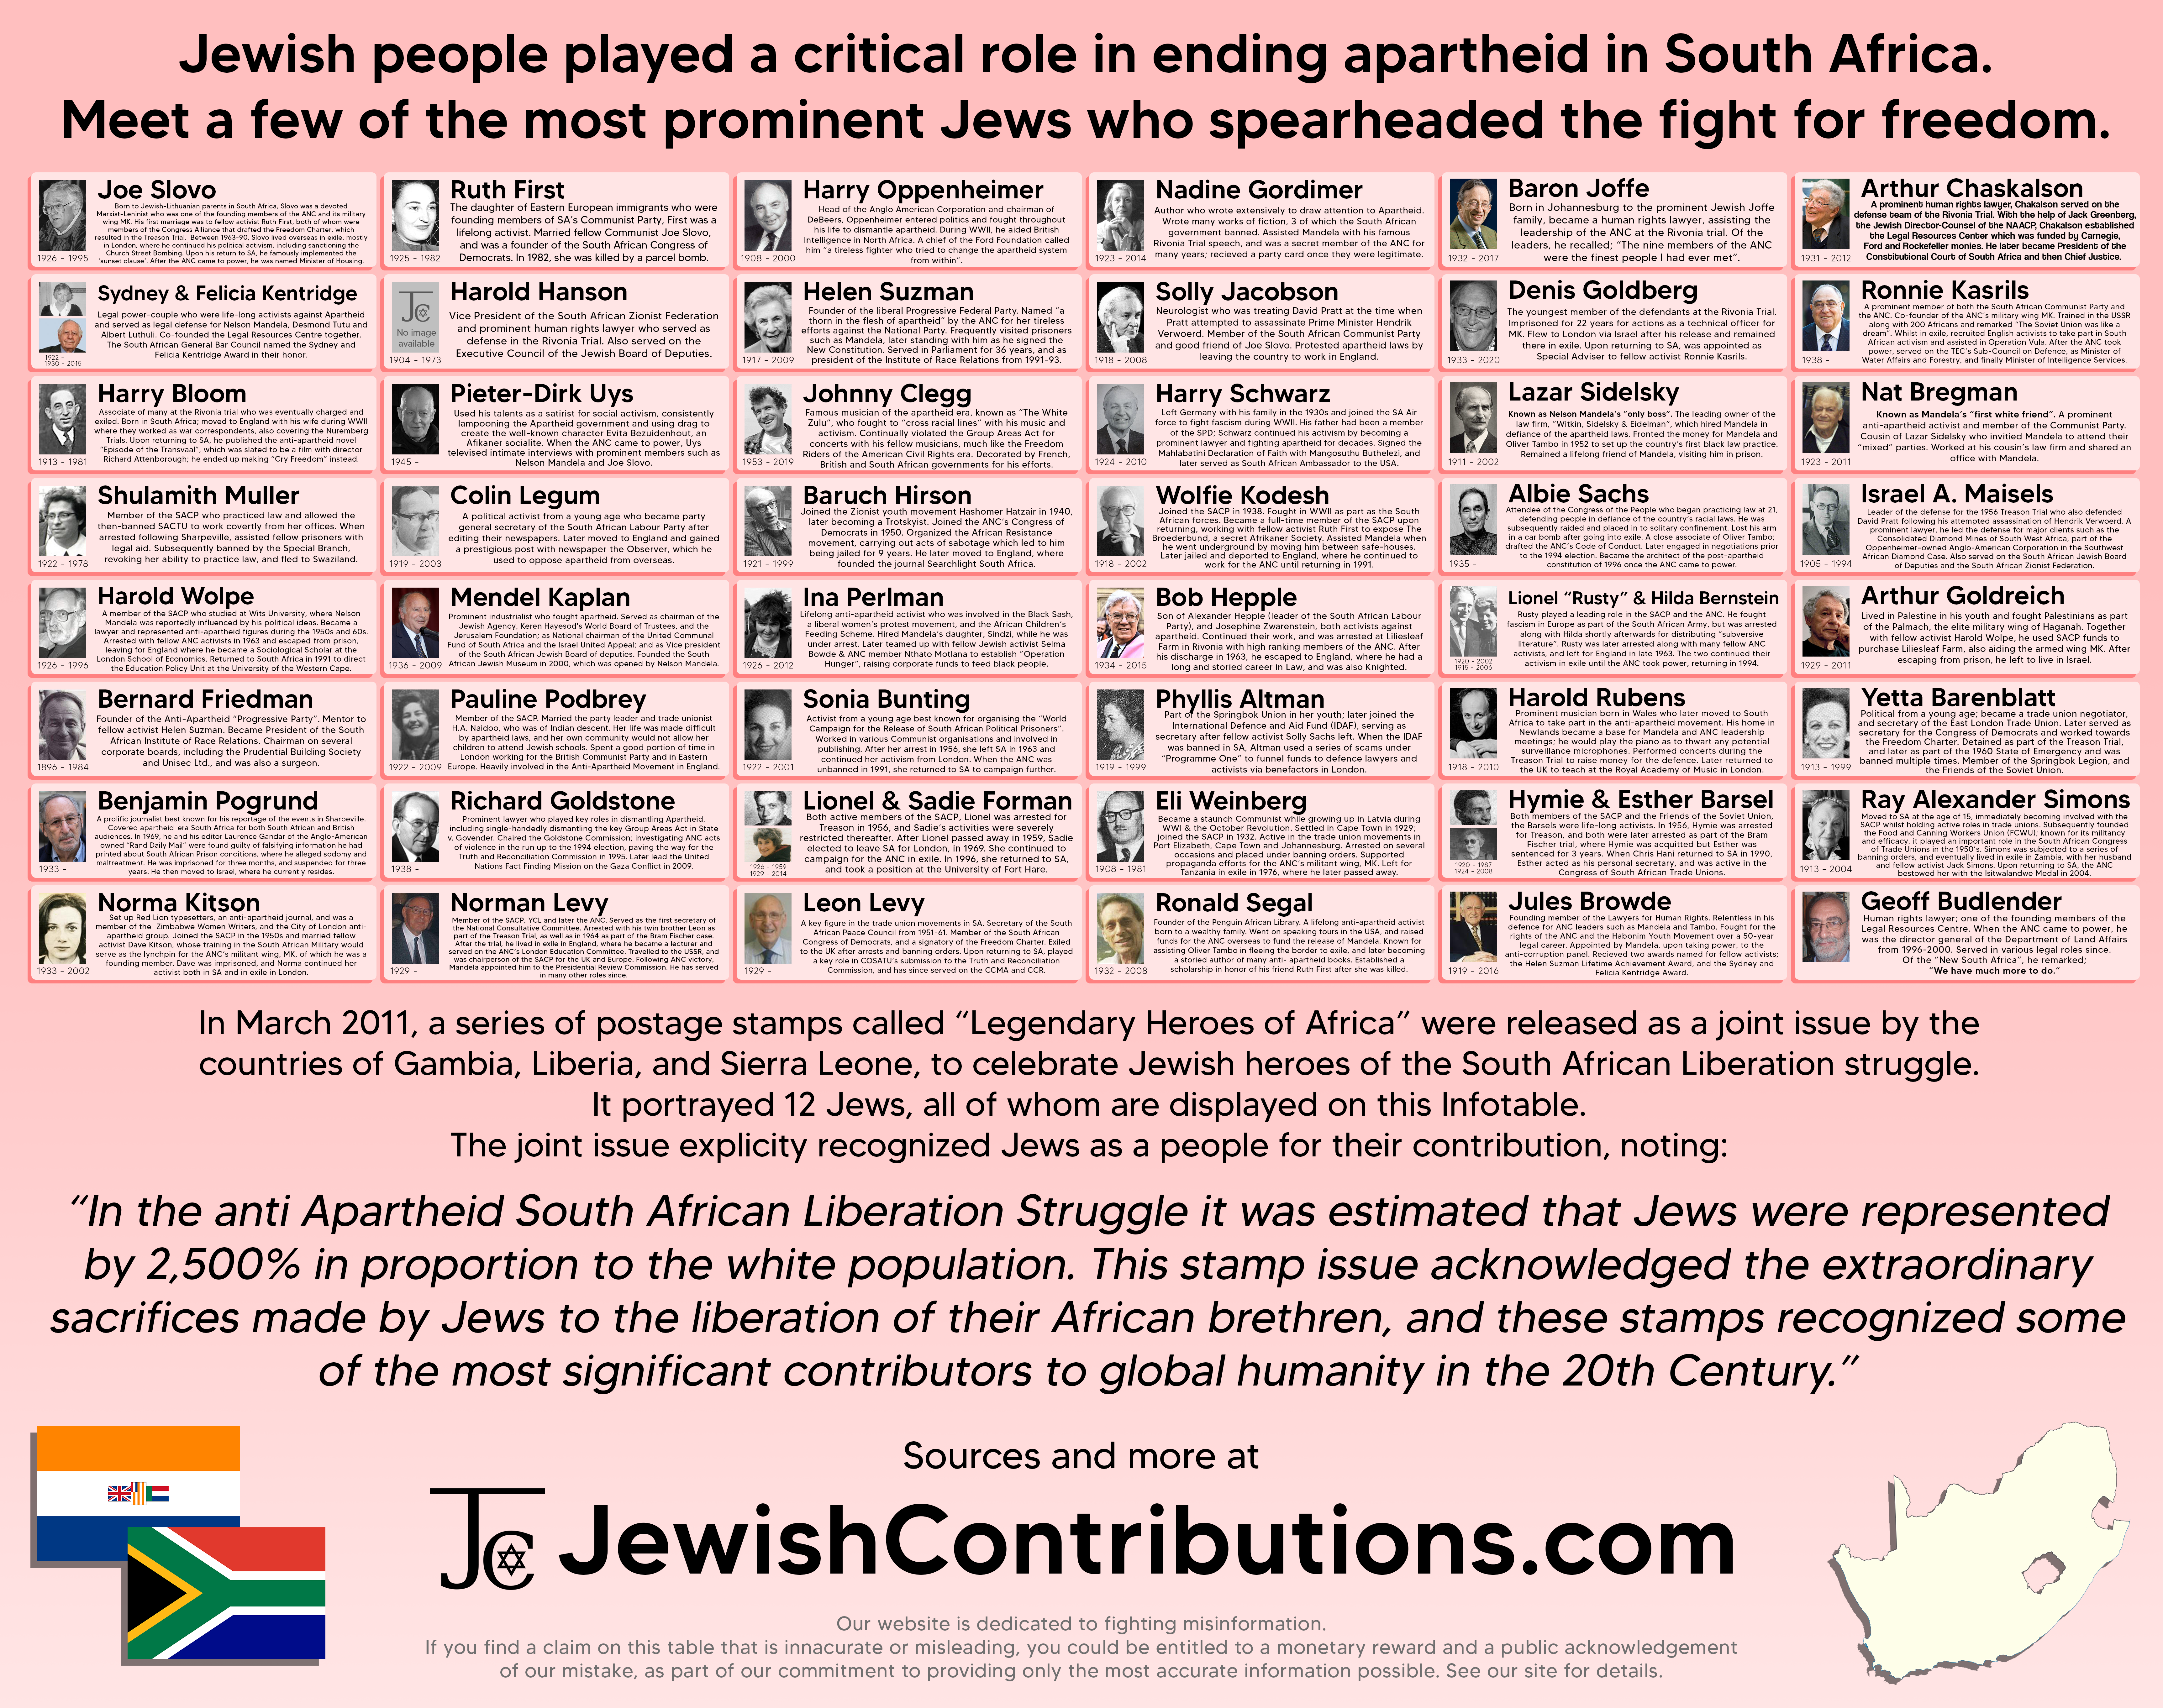 Jewish people played a critical role in ending apartheid in South Africa. Meet a few of the most prominent Jews who spearheaded the fight for freedom.